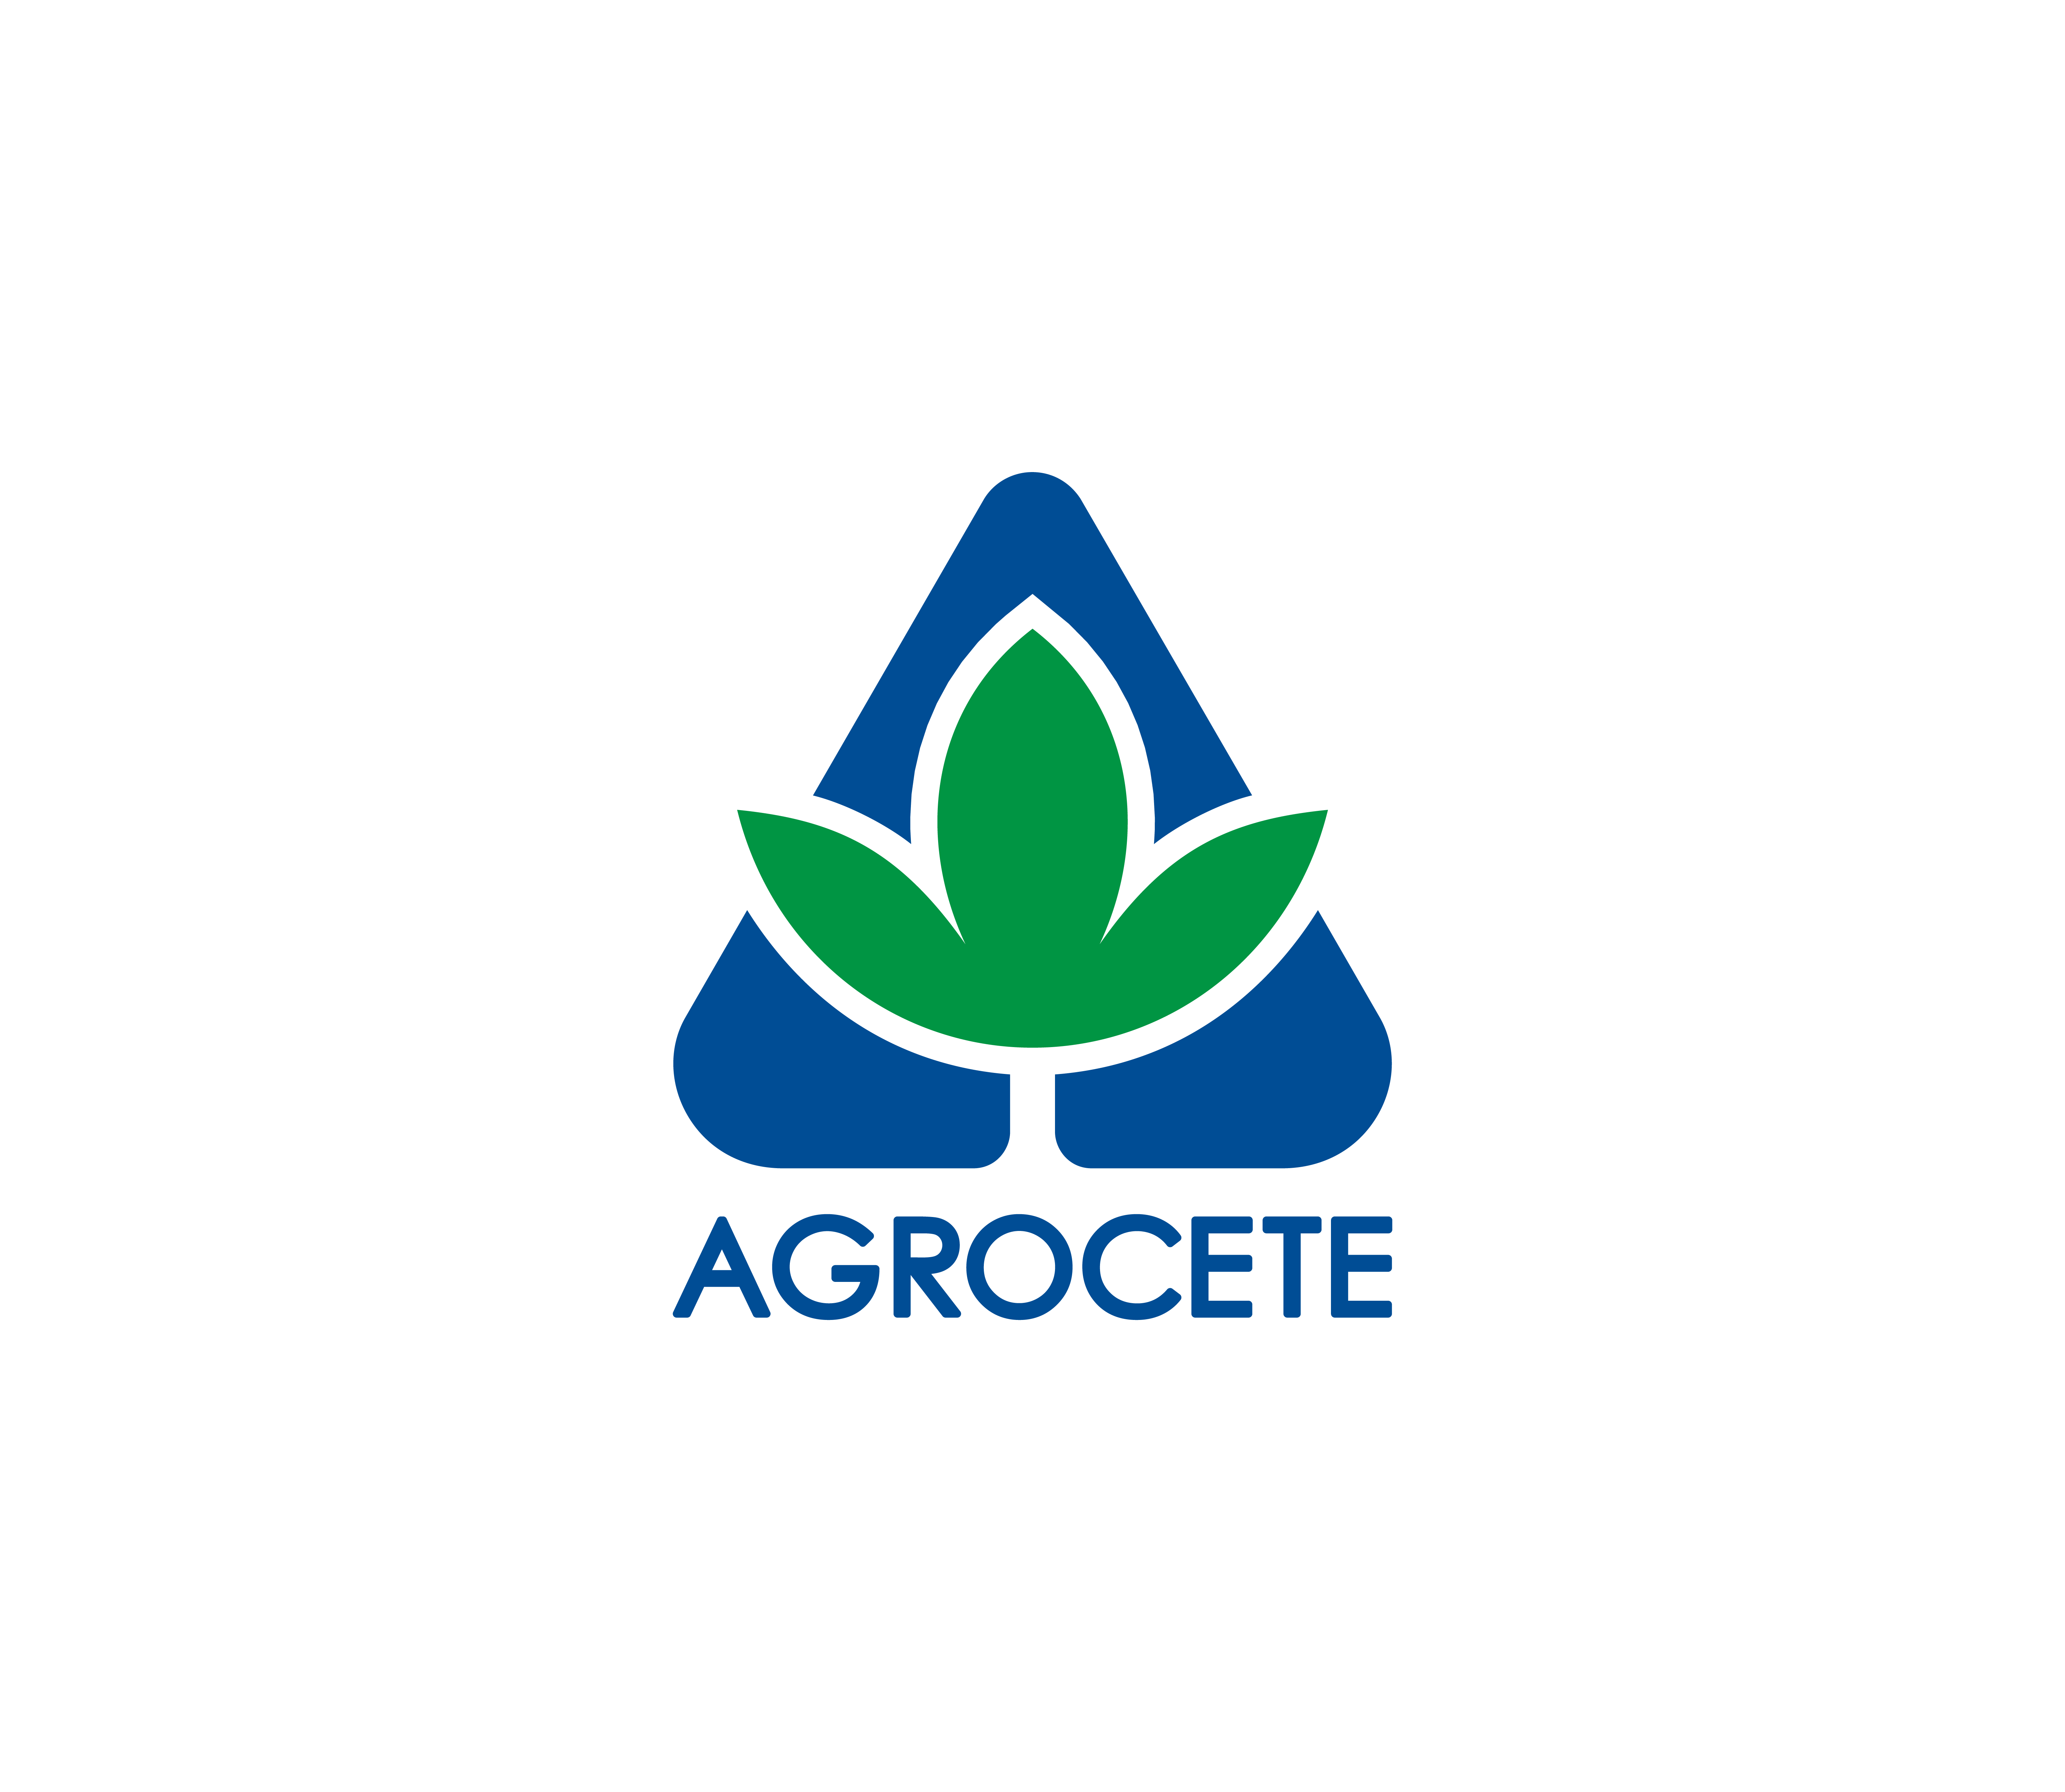 Agrocete